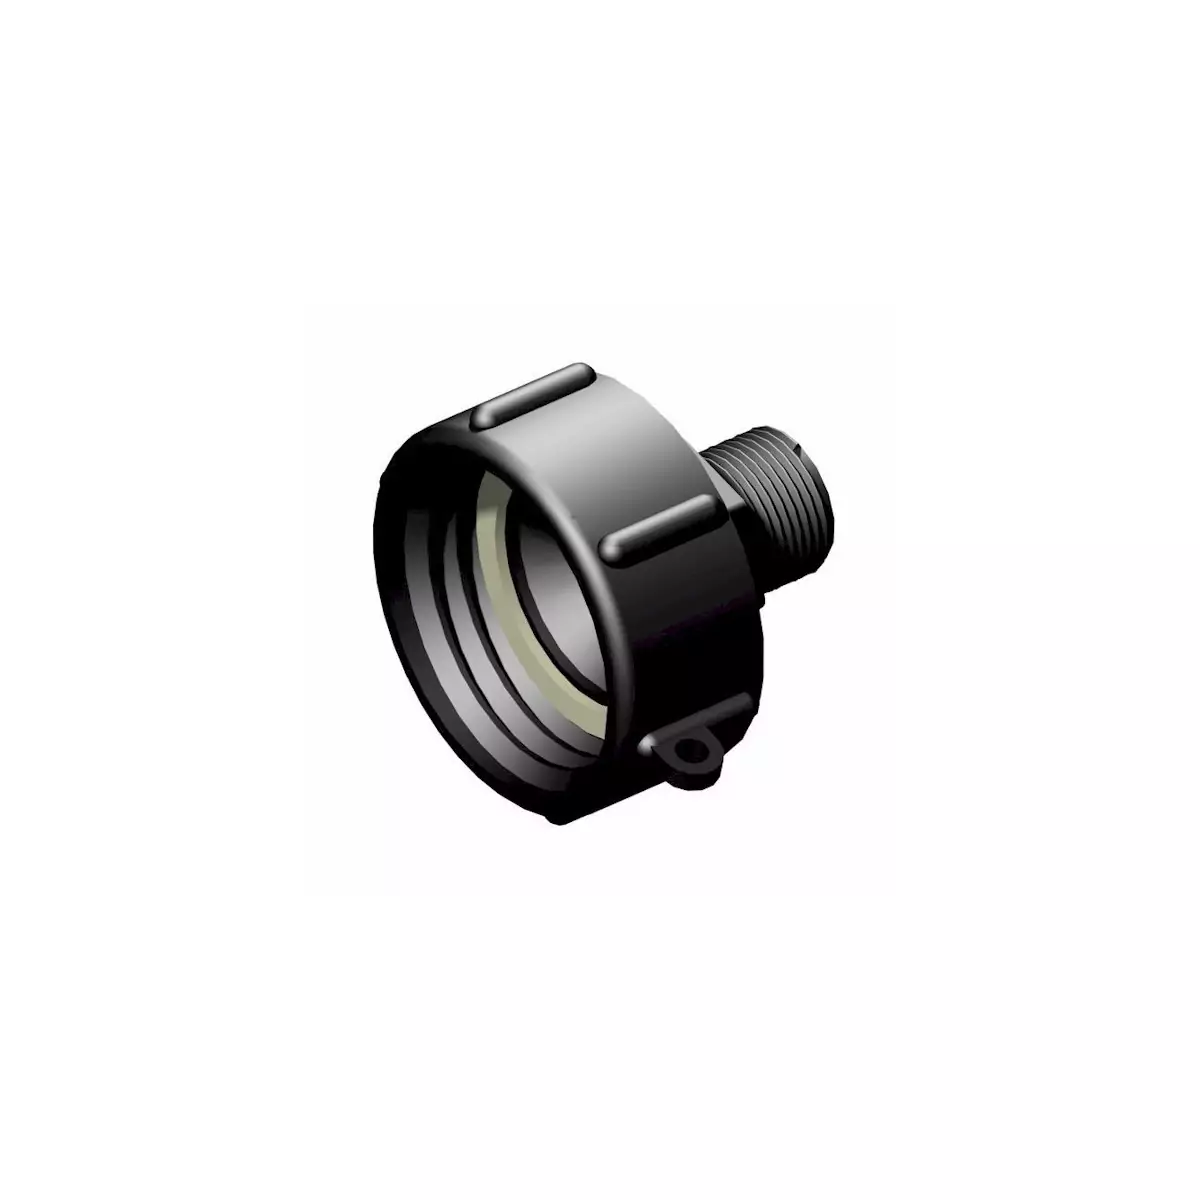 Product sheet 2 "female connector S60x6 - male 3/4", not gas